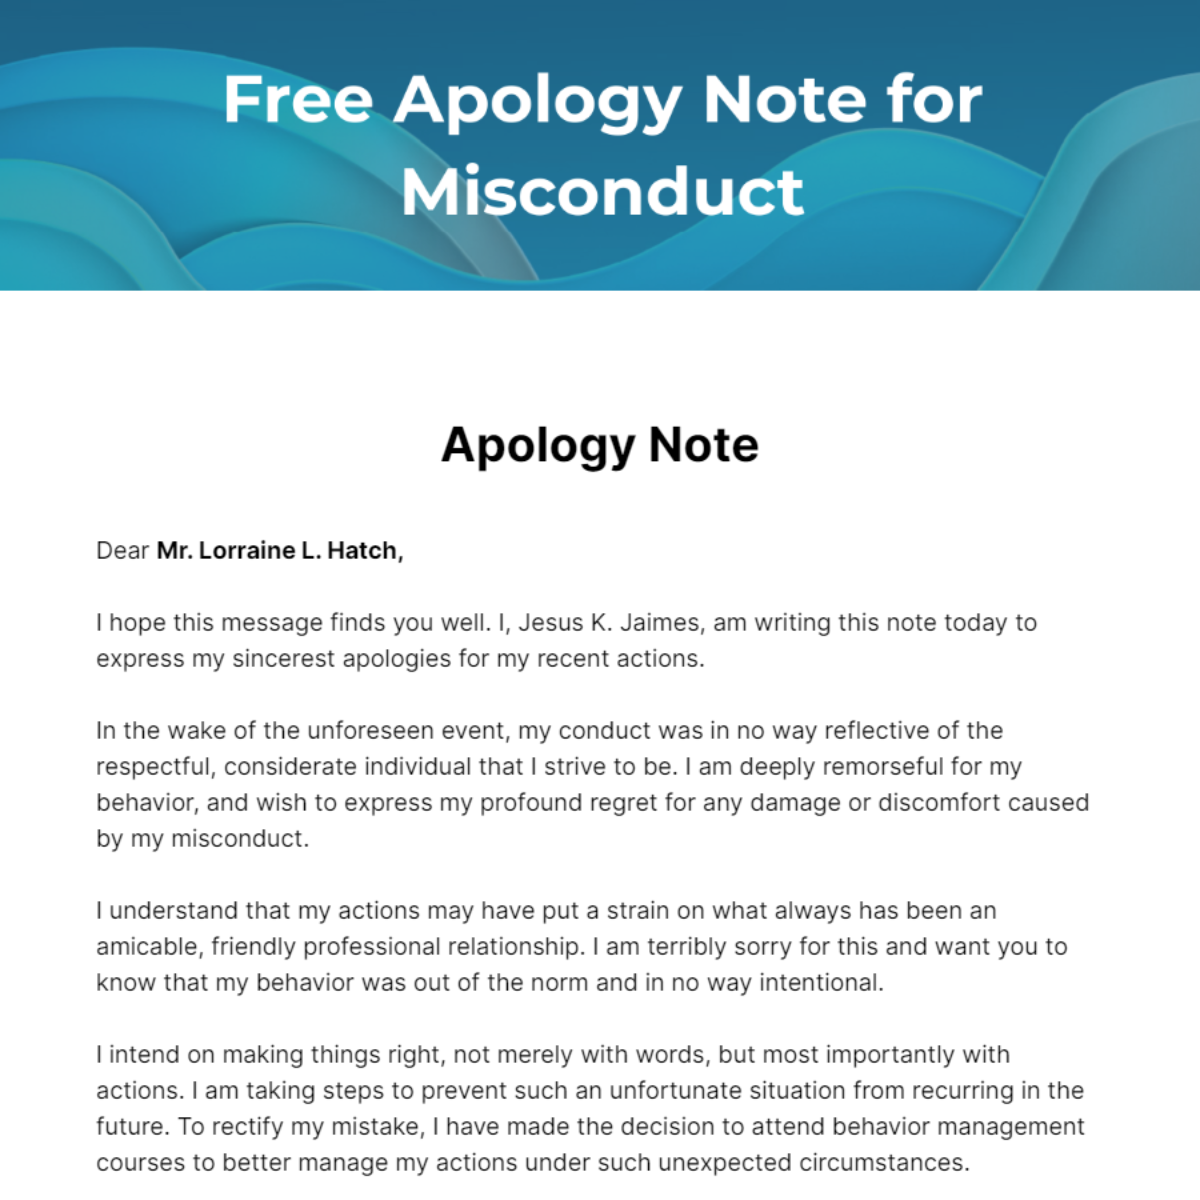 Free Apology Note for Misconduct Template